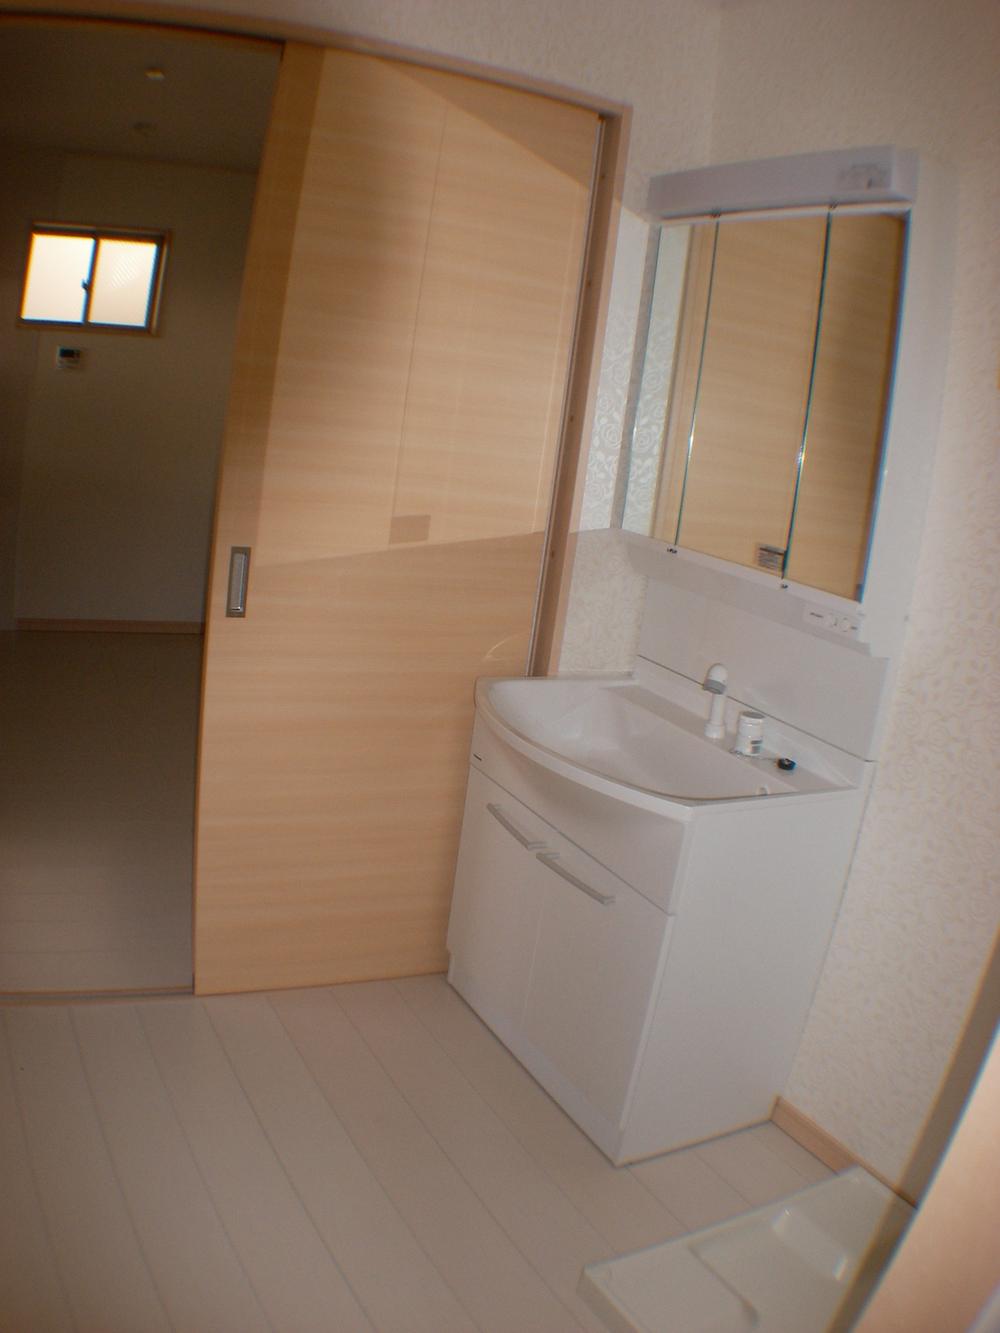 Wash basin, toilet. All storage space behind the mirror ・ Easy-to-use dressing table in the three-sided mirror.